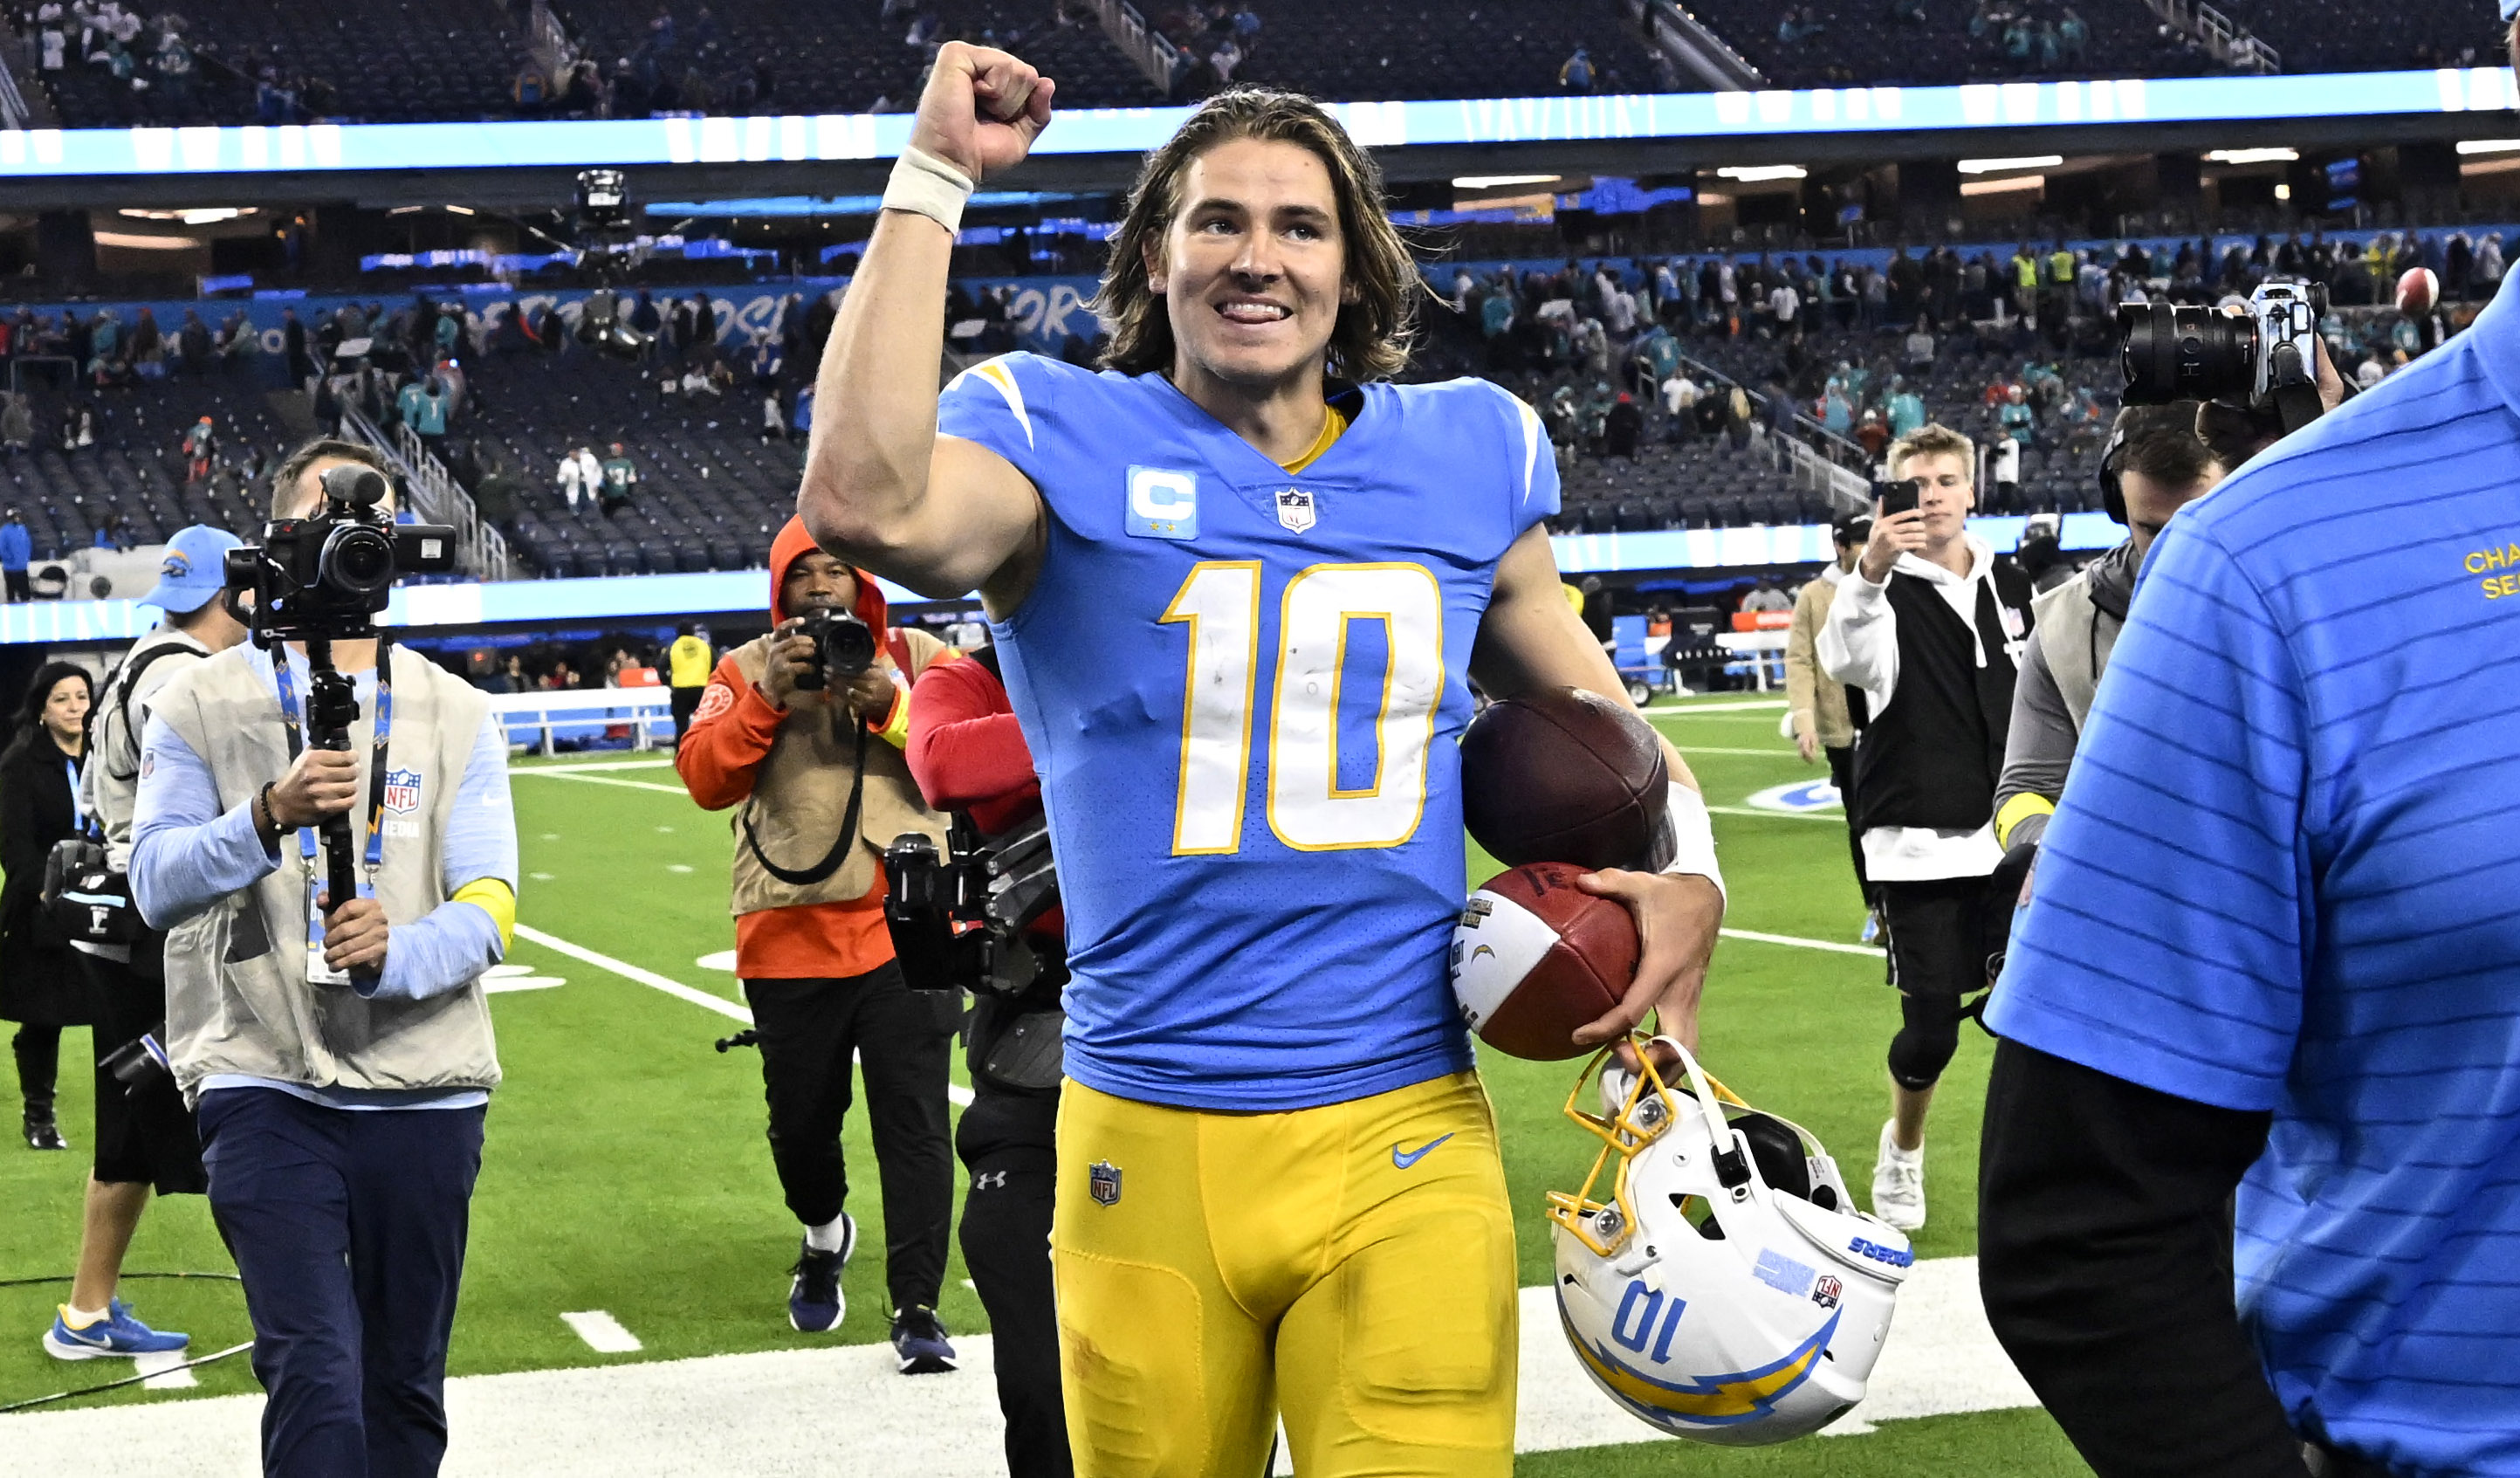 Justin Herbert of the Los Angeles Chargers reacts toward the crowd after defeating the Miami Dolphins 23-17 during a NFL football game at SoFi Stadium on December 11, 2022, in Inglewood, California. | Source: Getty Images